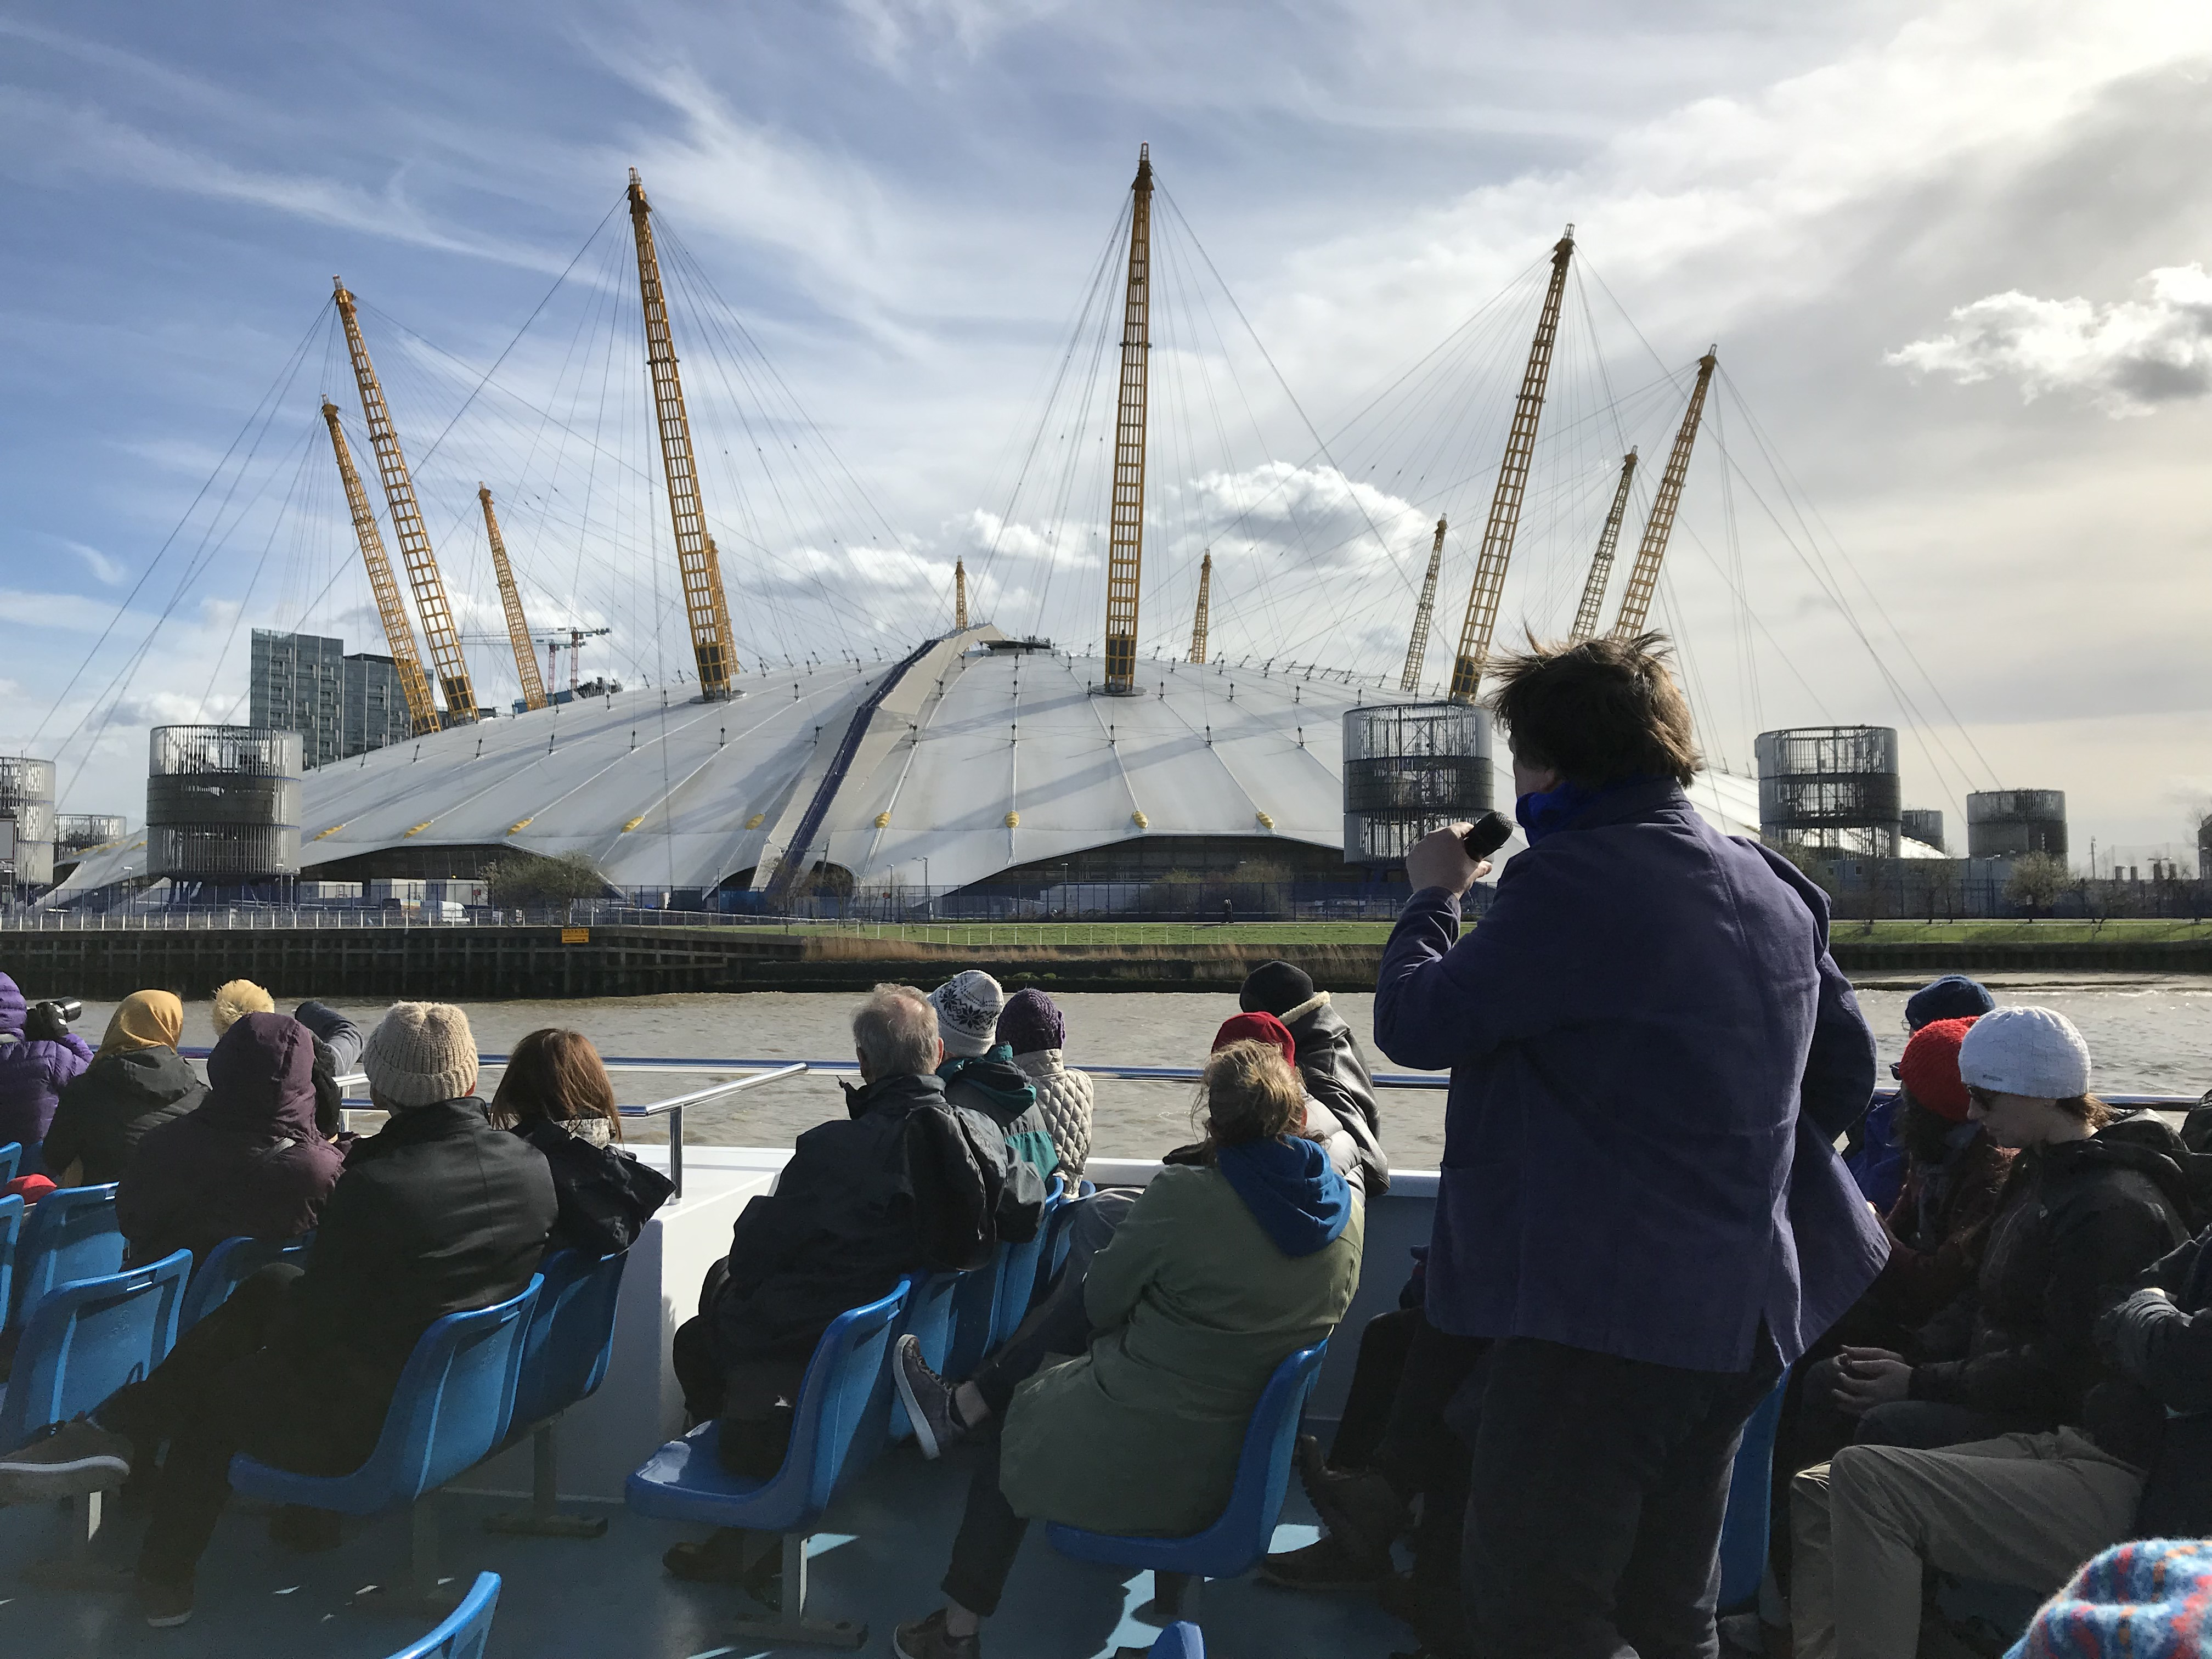 A crowd of people on the Thames East tour taking photos of The O2